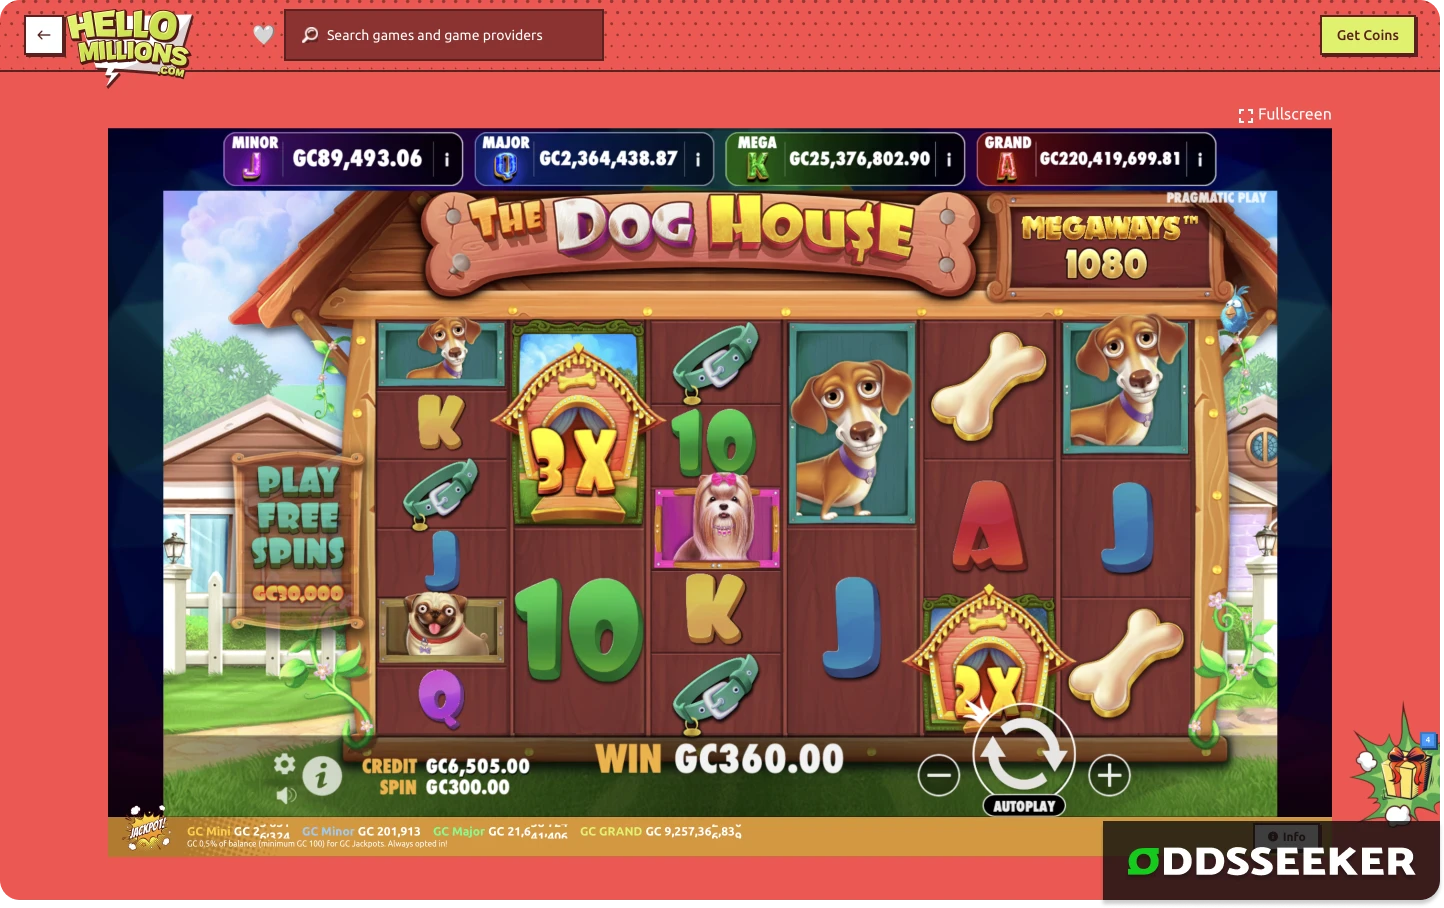 In-game screenshot of the live gameplay of The Dog House slot at Hello Millions casino